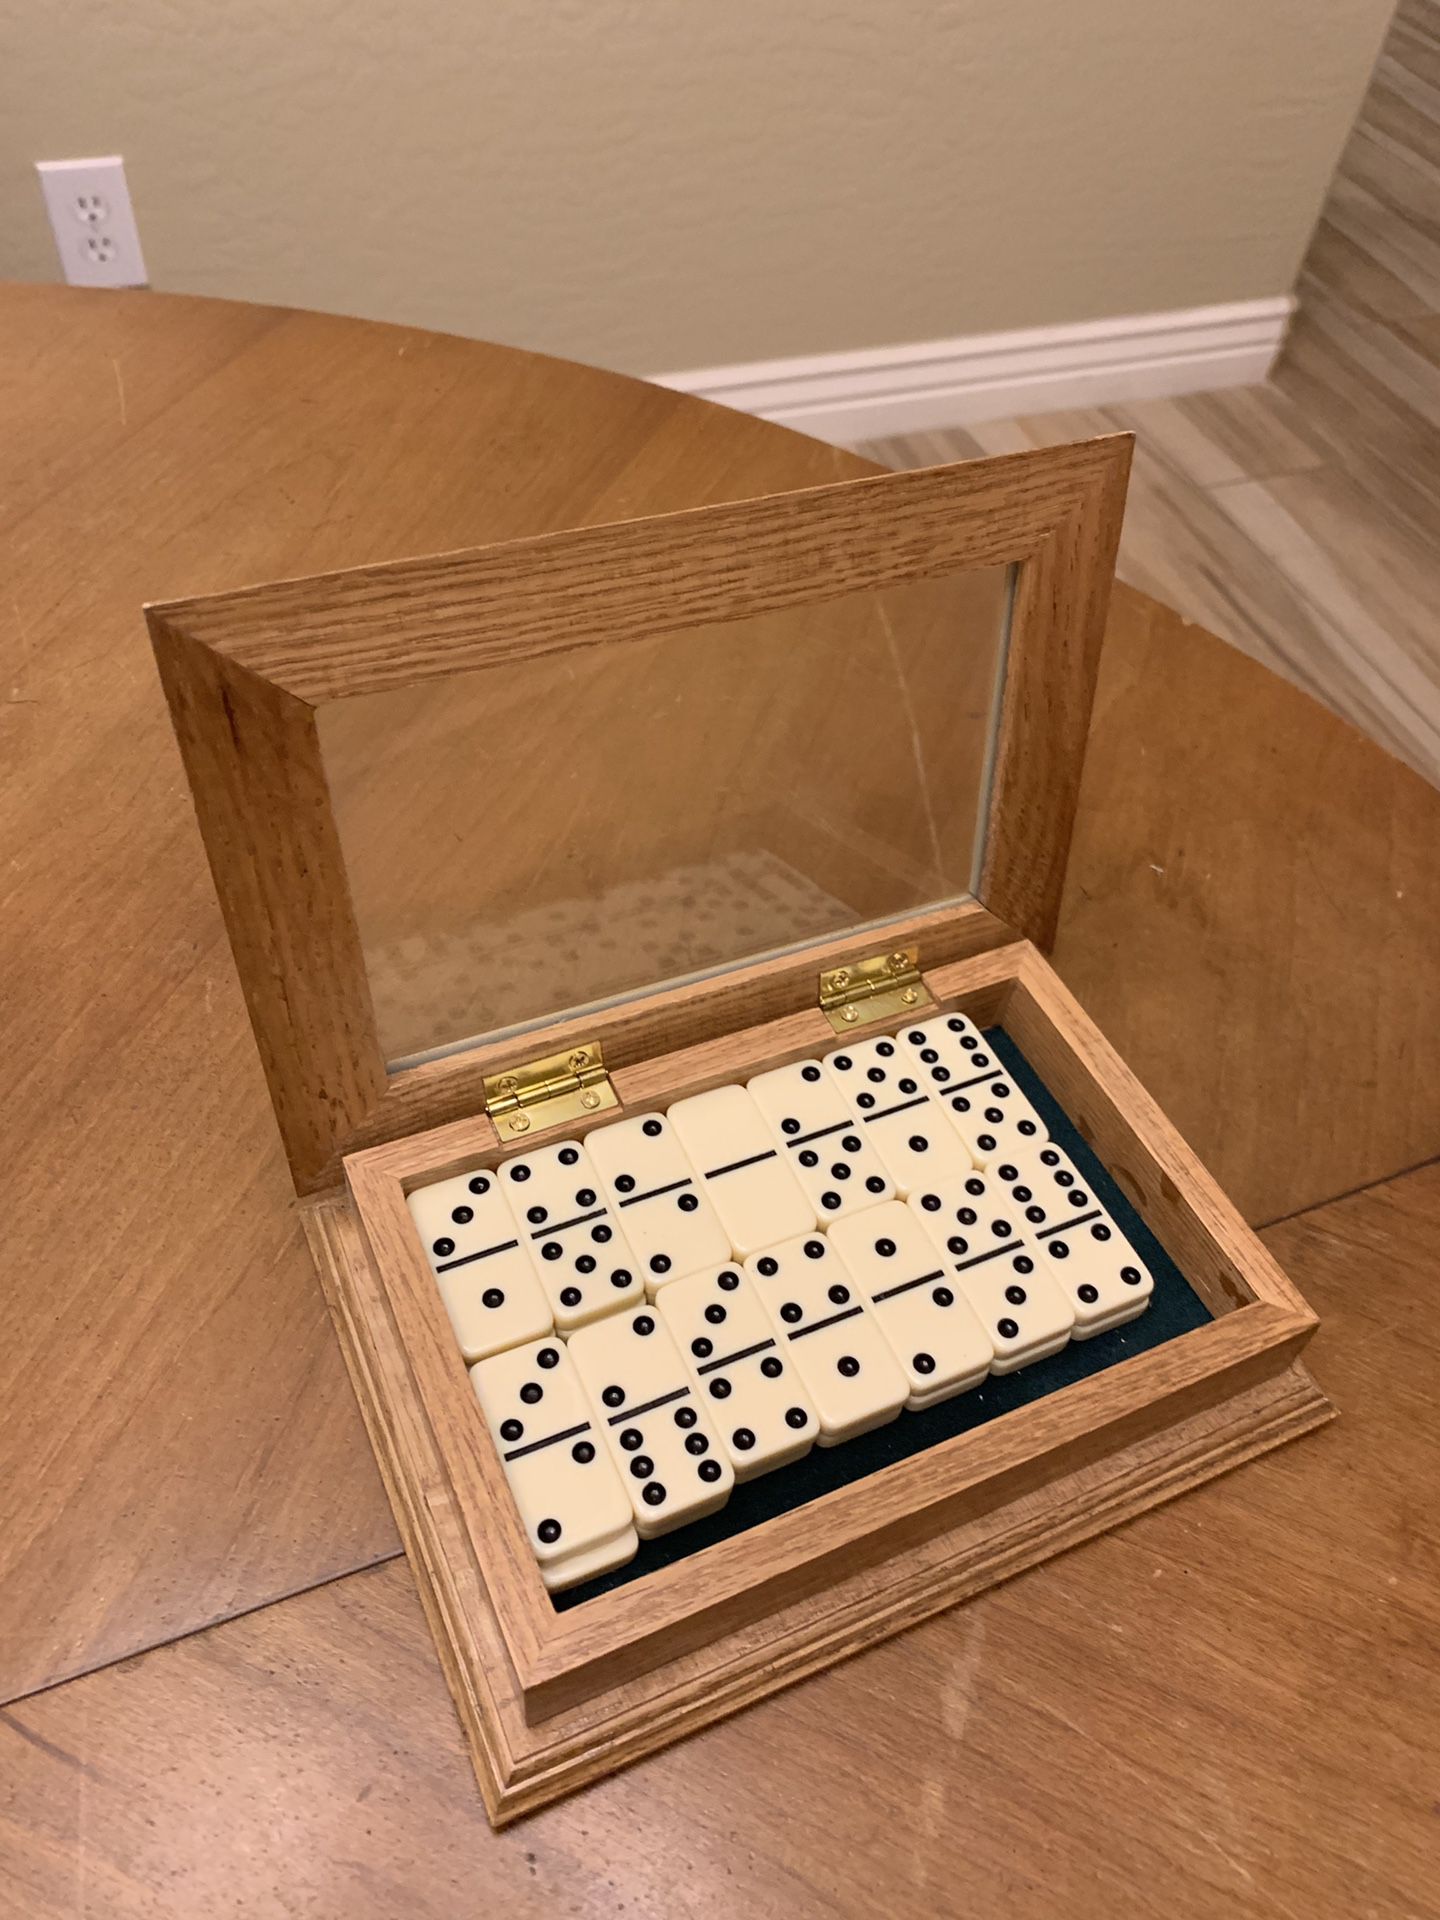 Dominos set in wood and glass case